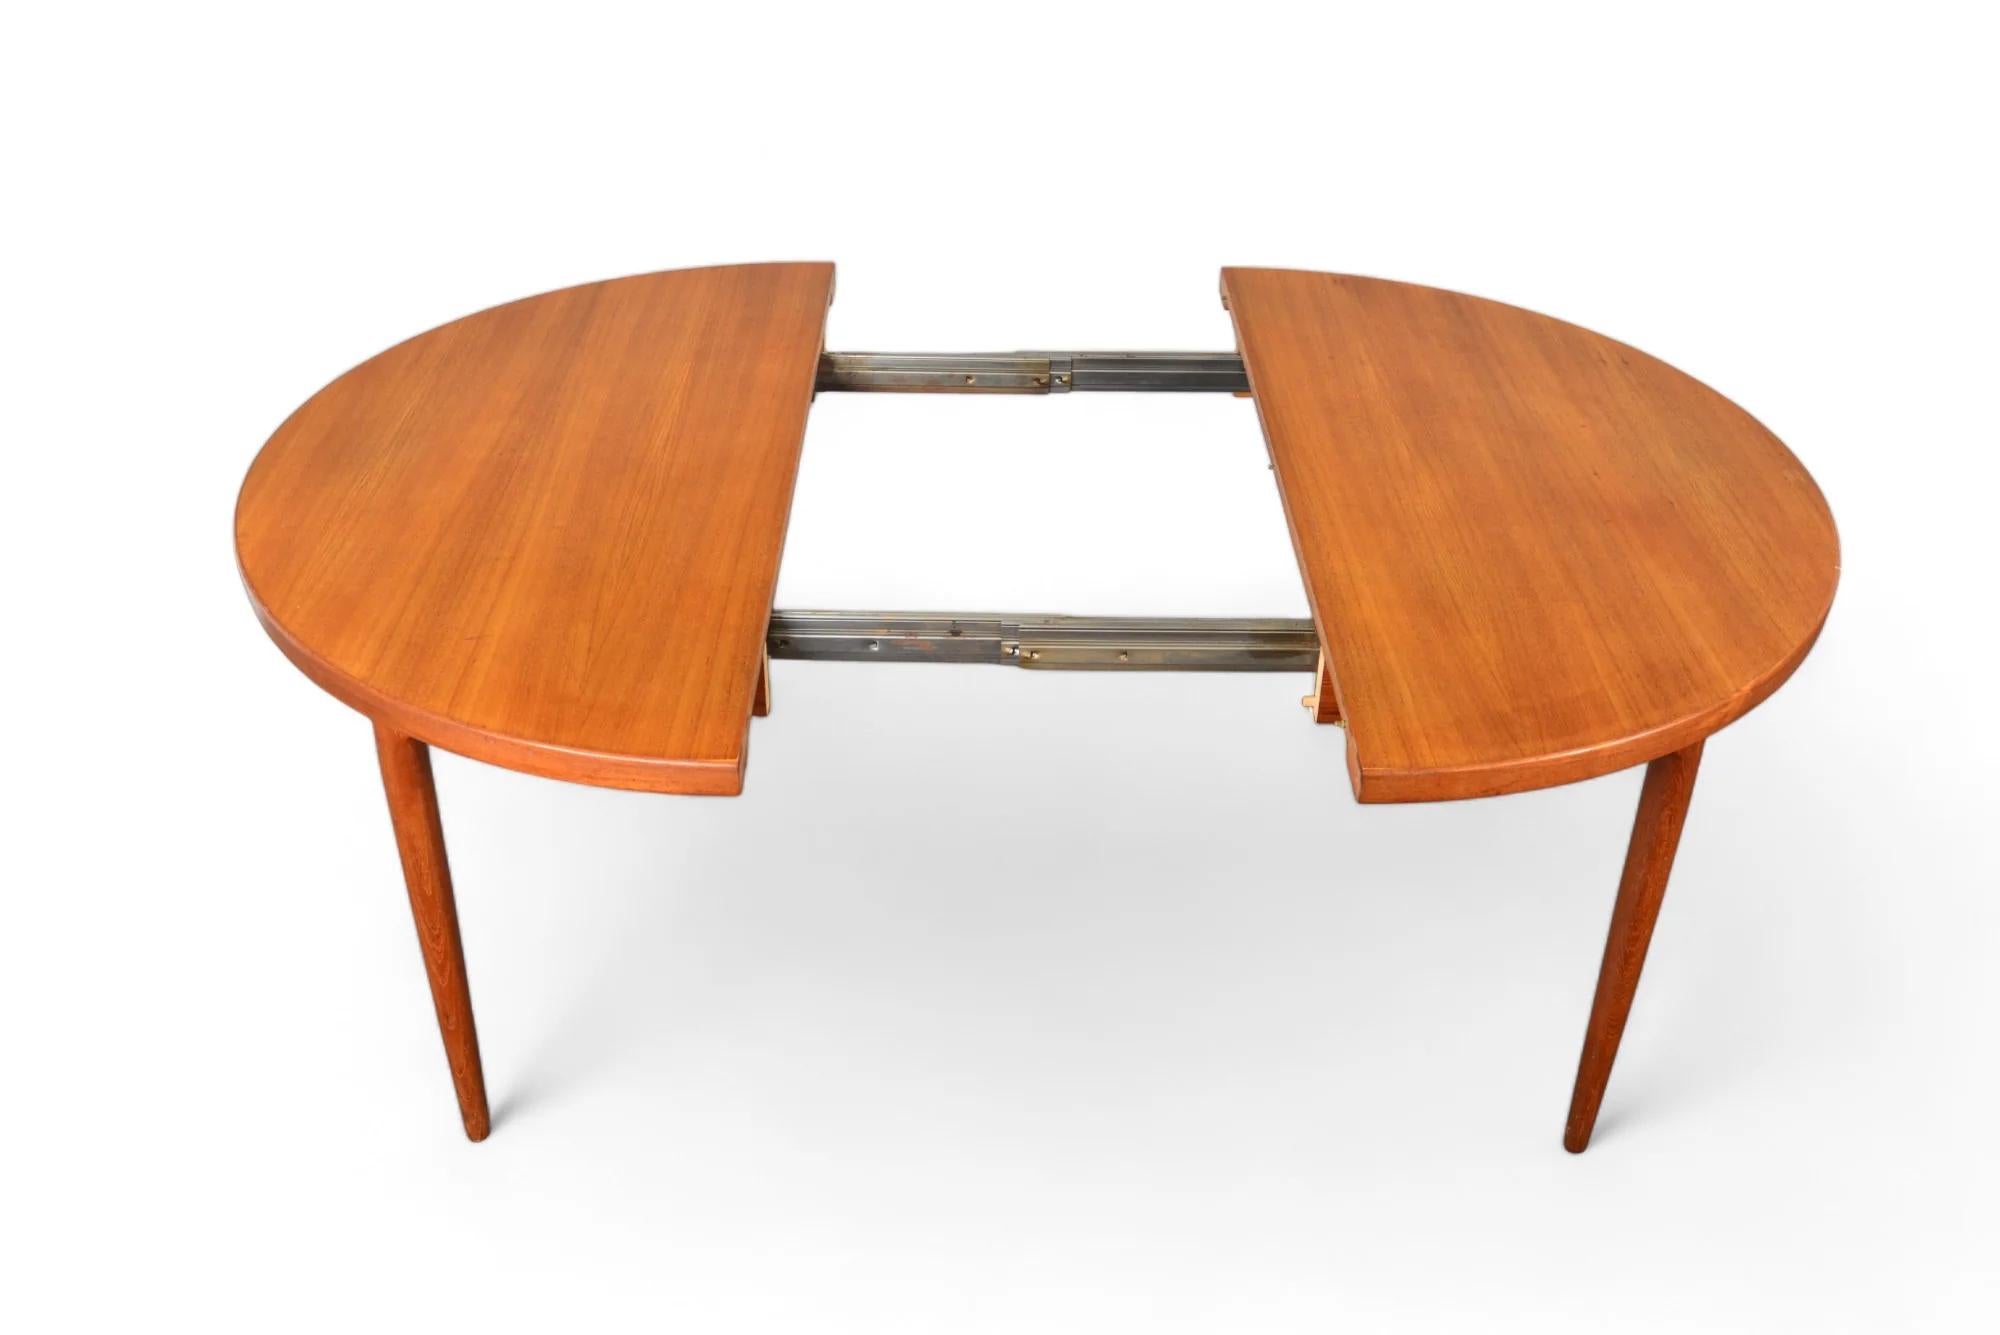 20th Century Round Danish 2 Leaf Teak Dining Table By Cj Rosengaarden + Coffee Table For Sale